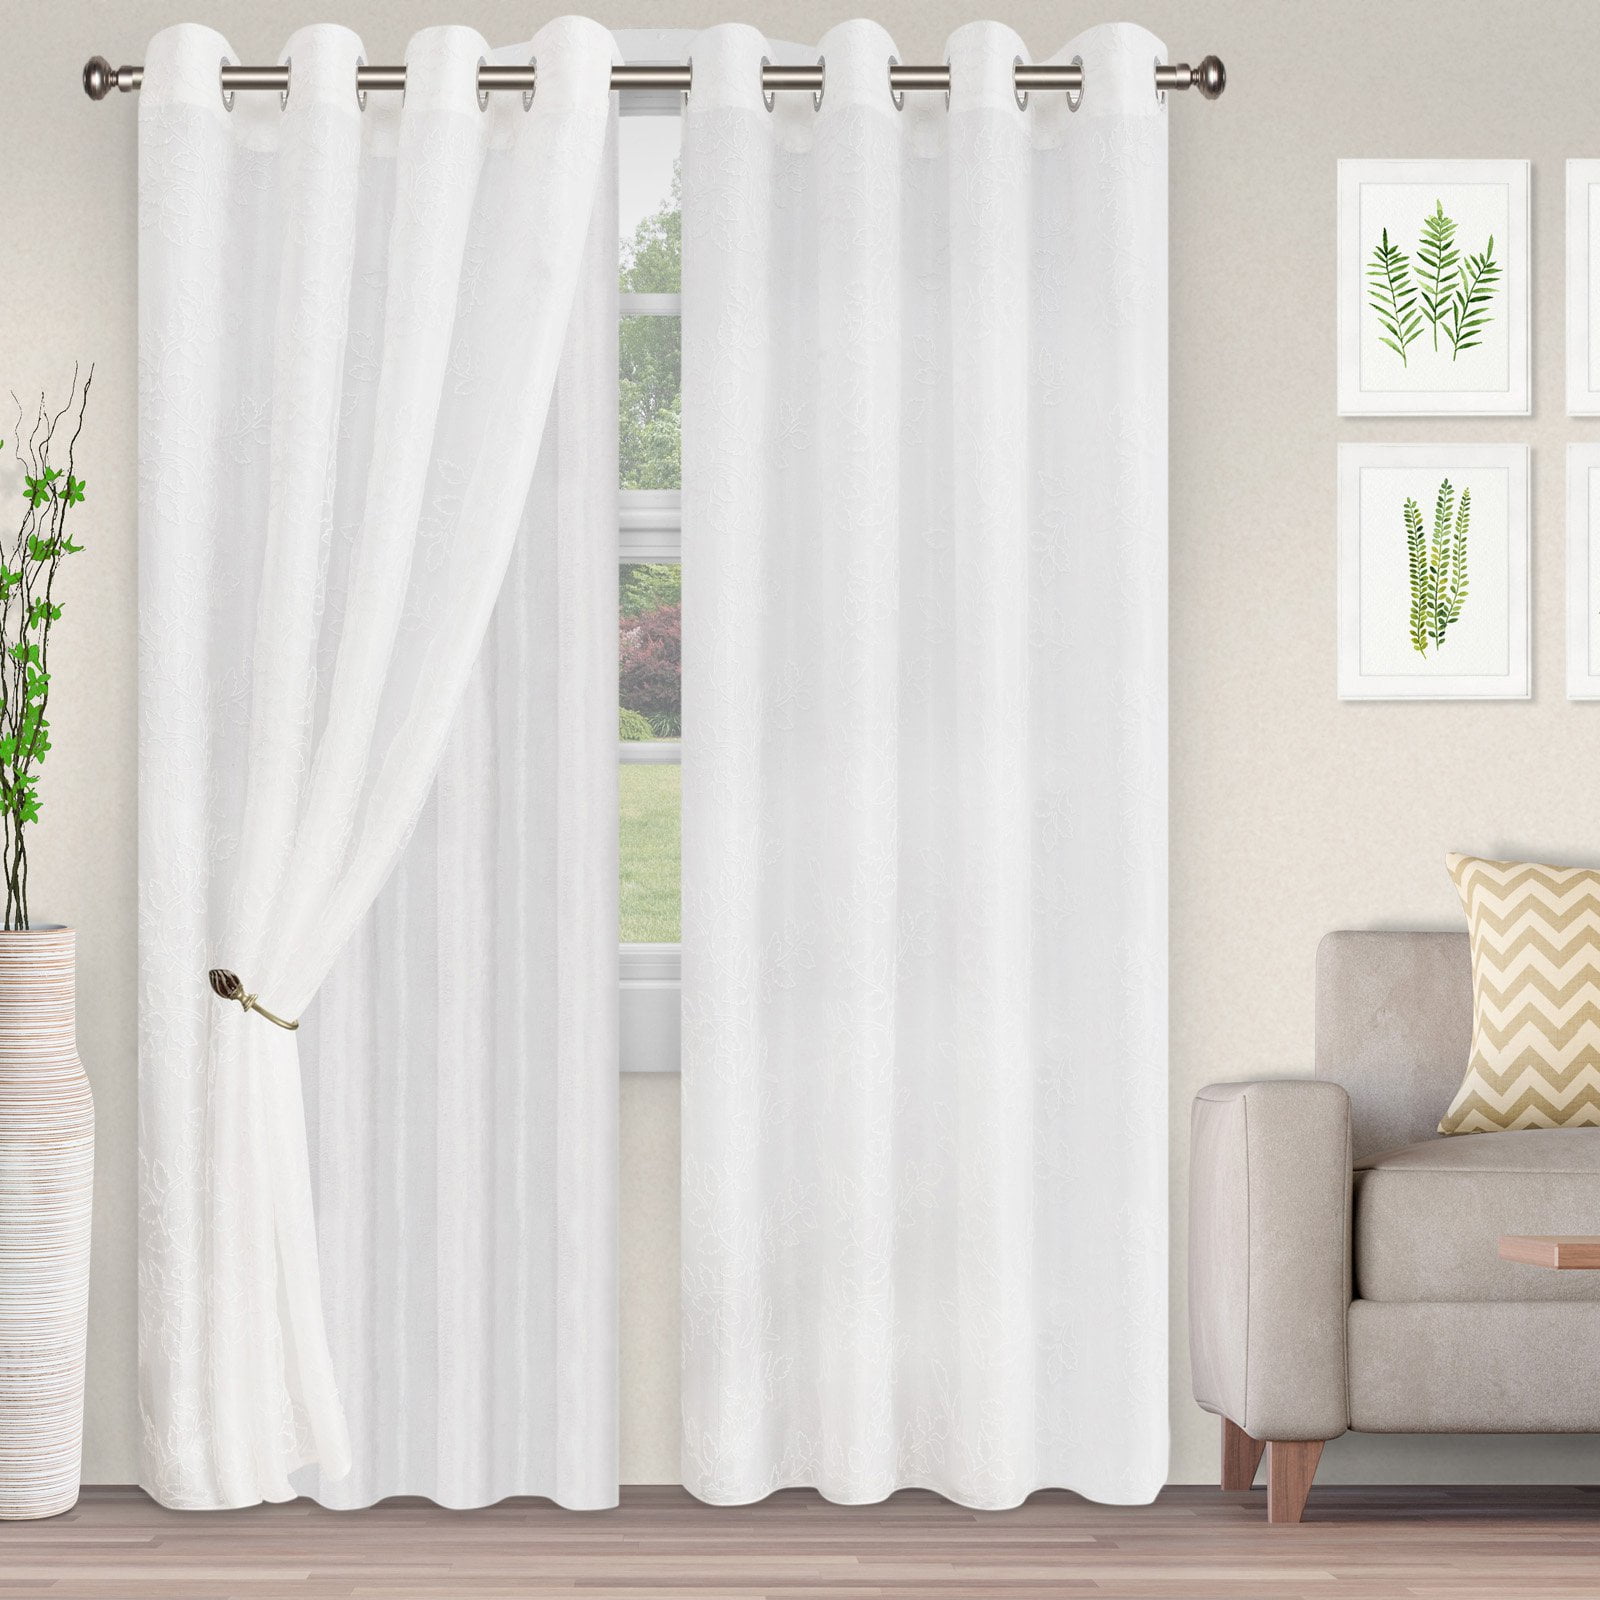 Superior Foliage Embroidered 2 Panels Sheer Curtains - Walmart.com